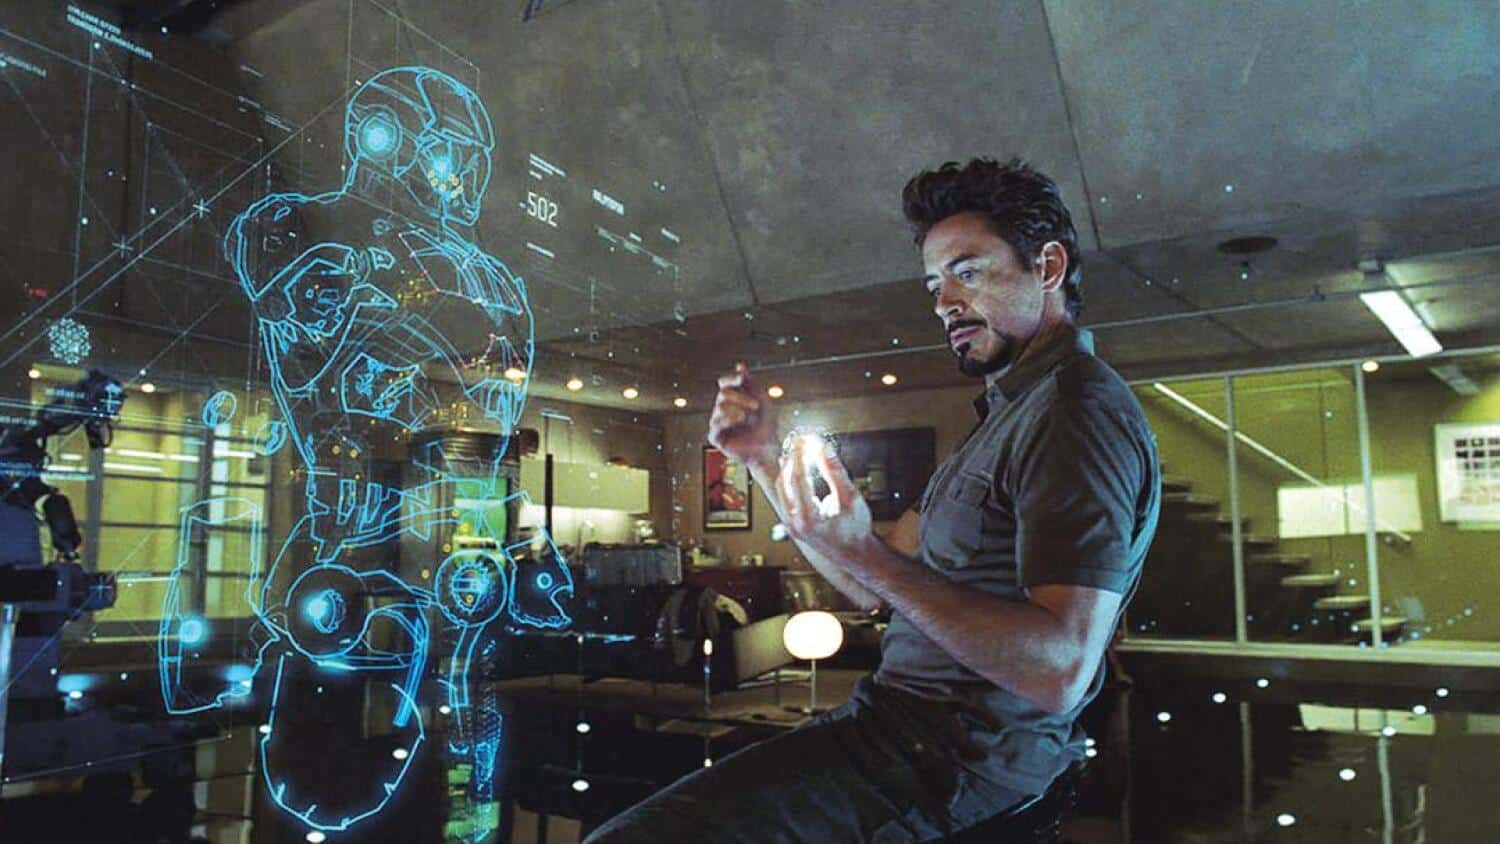 Robert Downey Jr. as Tony Stark in Iron Man, designing a suit of flying armor with the help of his digital assistant JARVIS. A holographic image of a wireframe suit is beside Tony as he speaks to Jarvis through a ball of light.